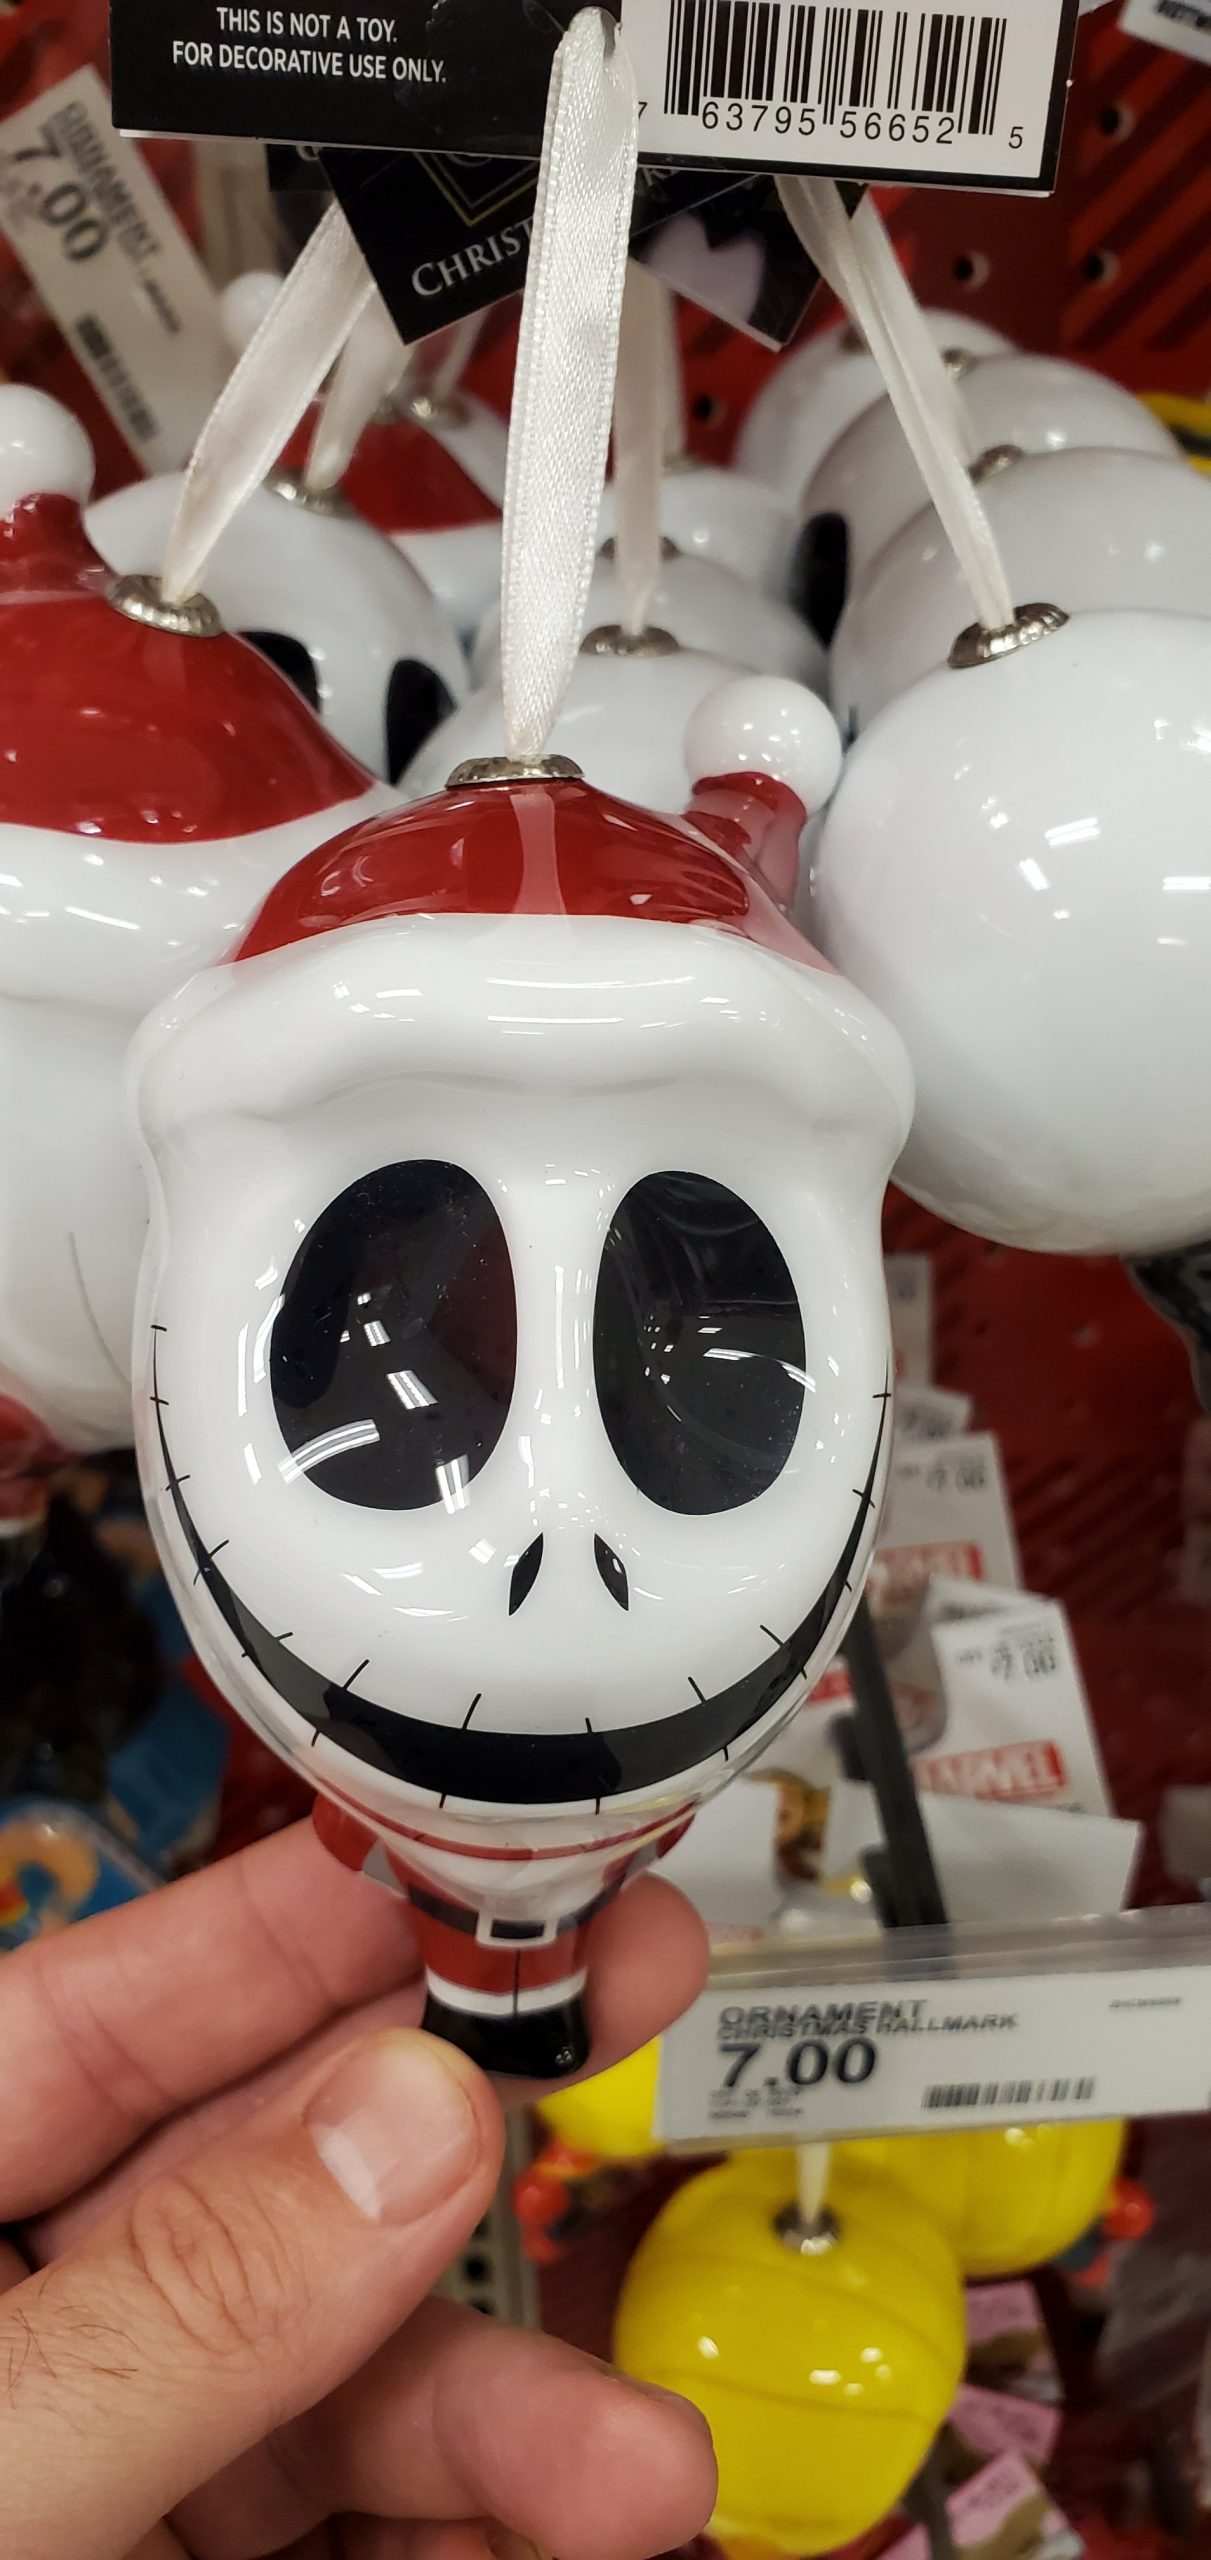 Target Disney Christmas Collection Is Festive And Fun